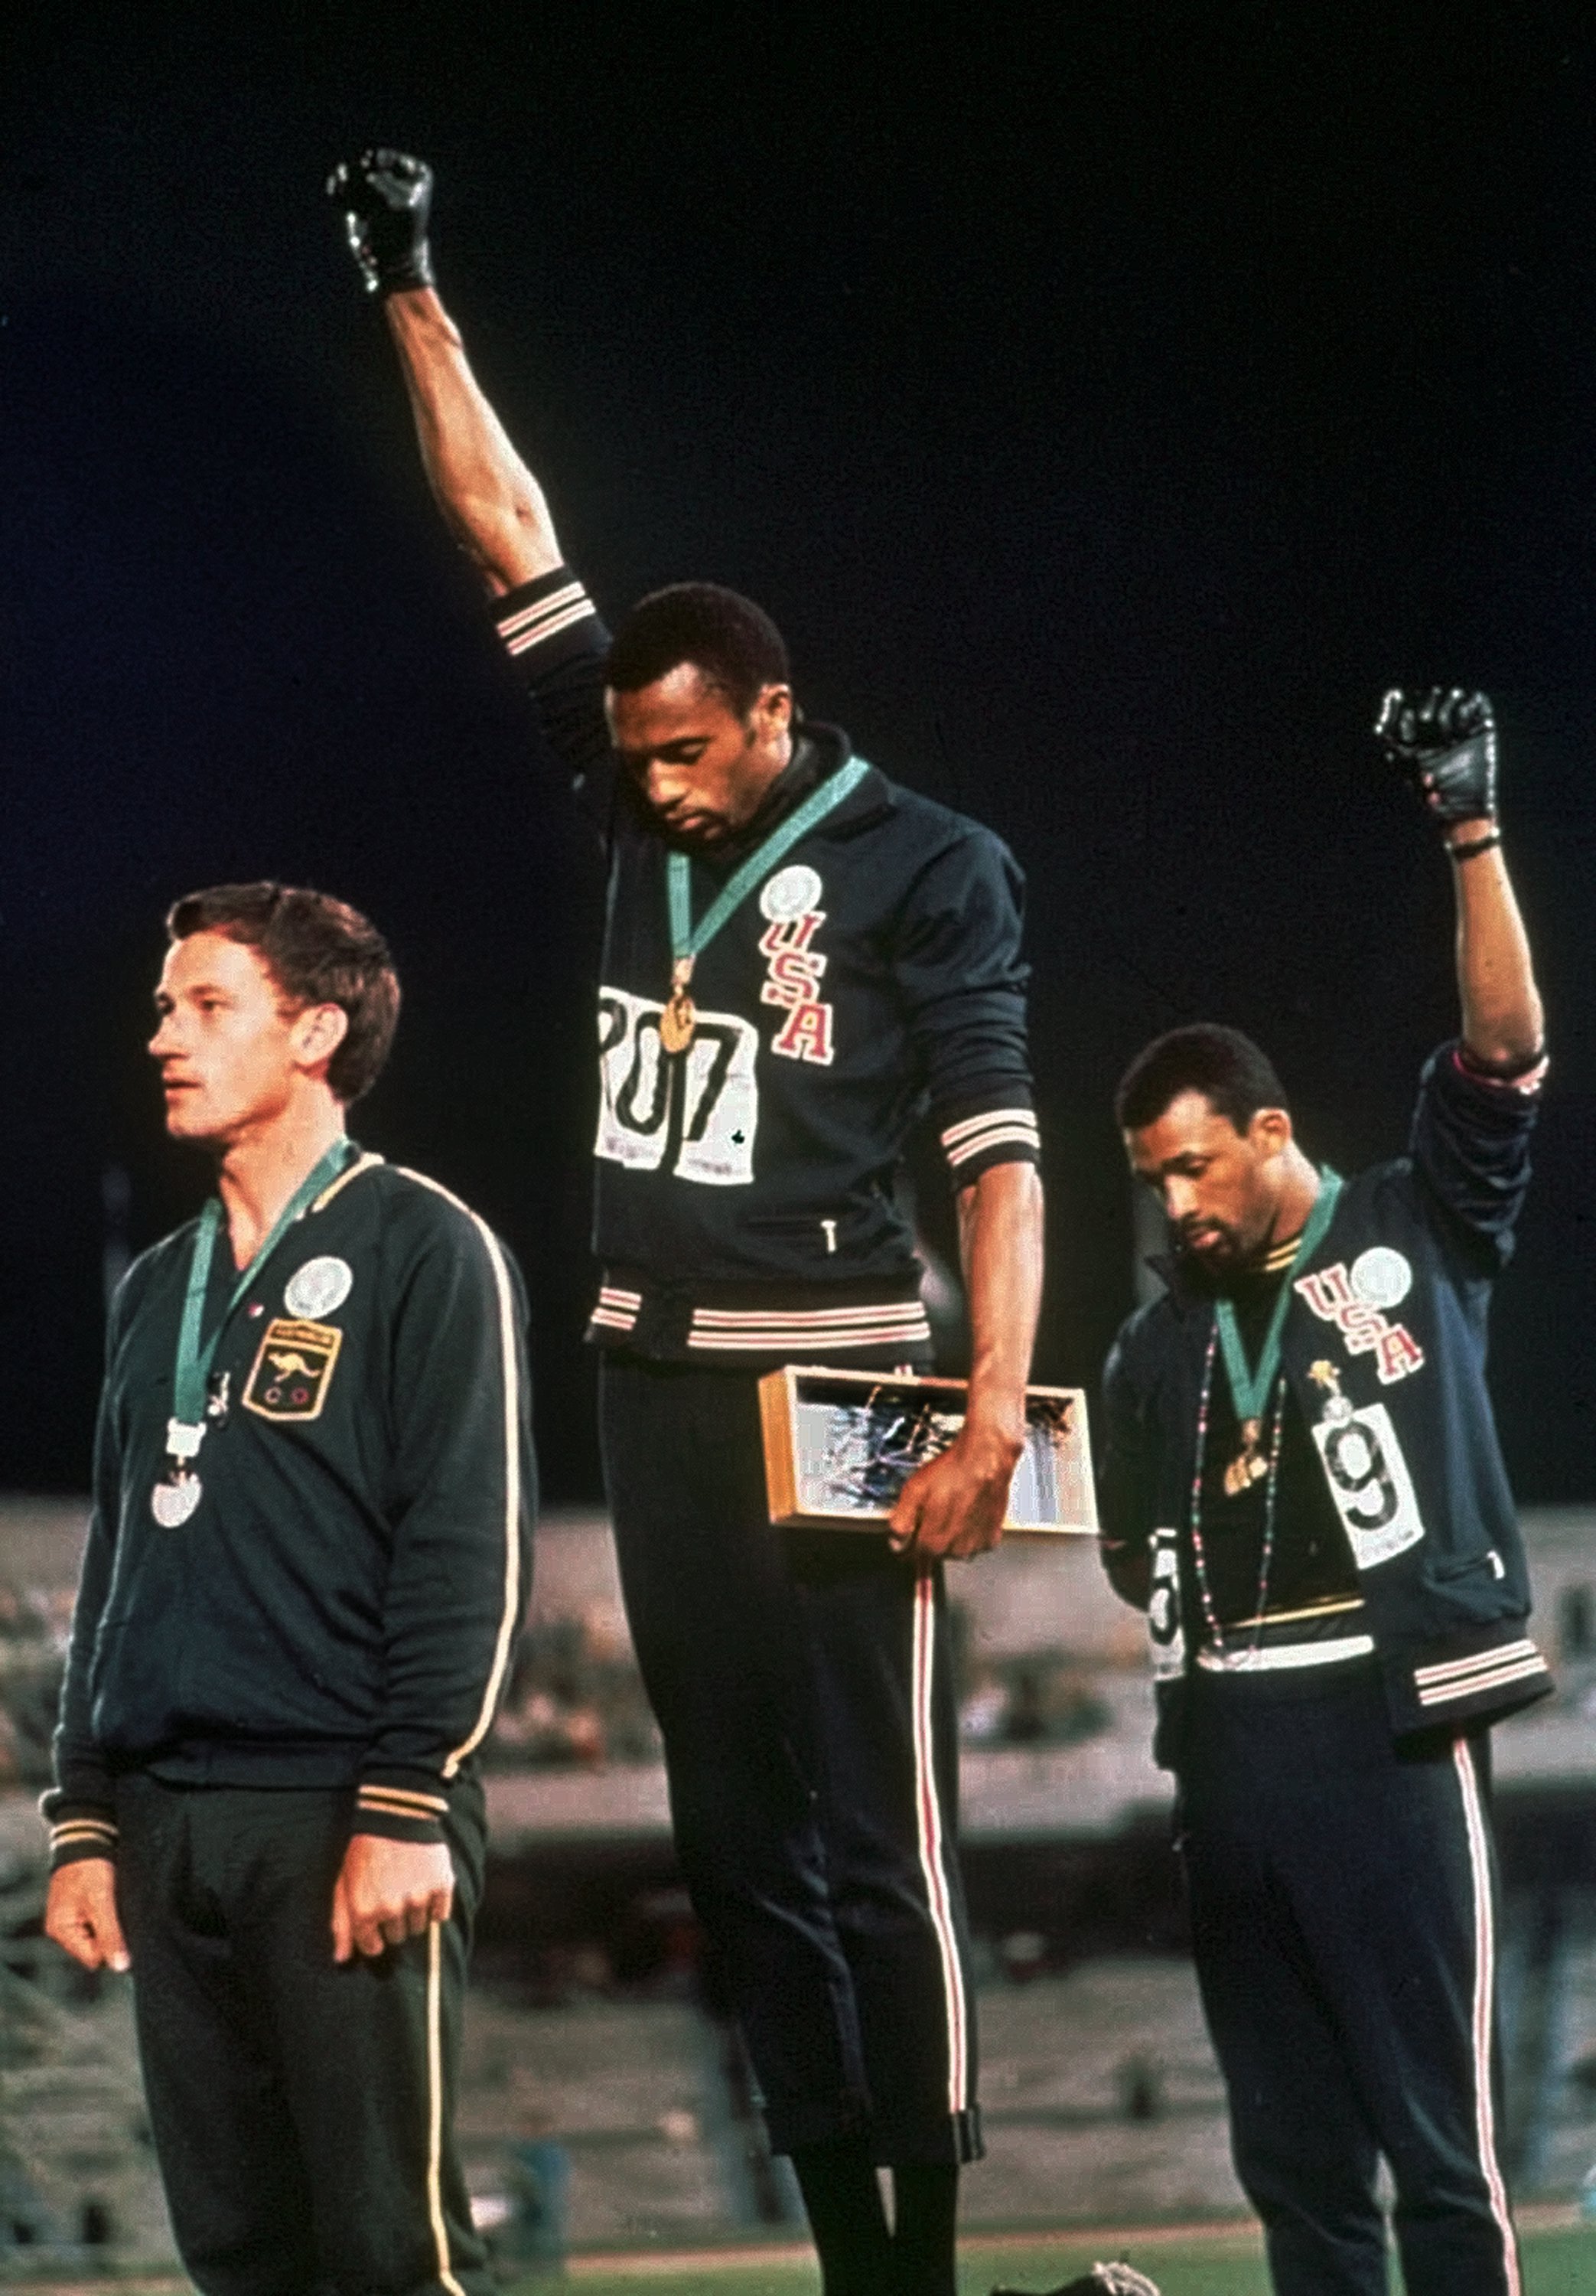 Extending gloved hands skyward in racial protest, US athletes Tommie Smith (centre) and John Carlos (right) stare downward during the 1968 Olympic medal ceremony [AP Photo]